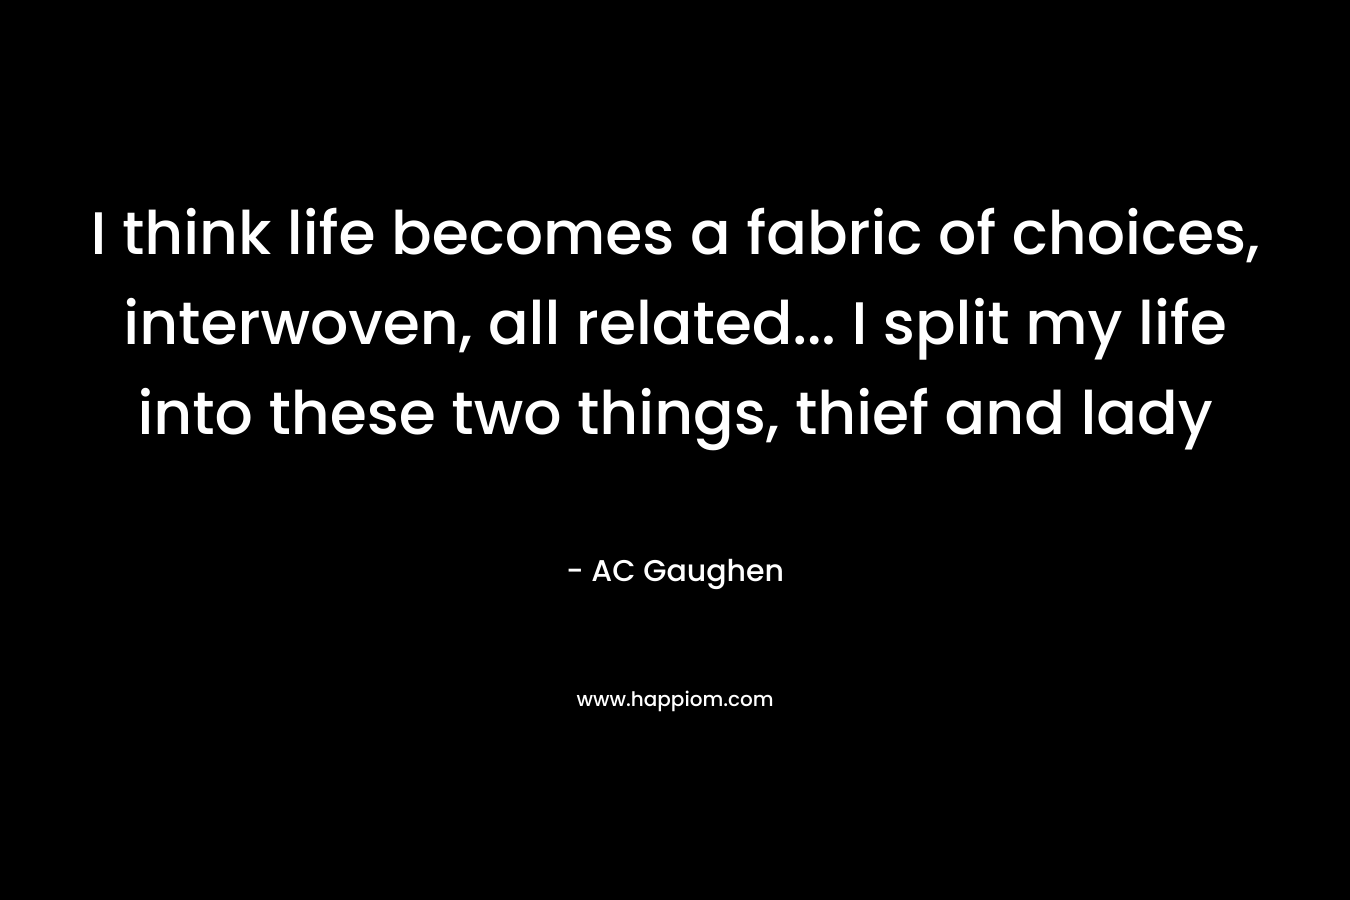 I think life becomes a fabric of choices, interwoven, all related… I split my life into these two things, thief and lady – AC Gaughen